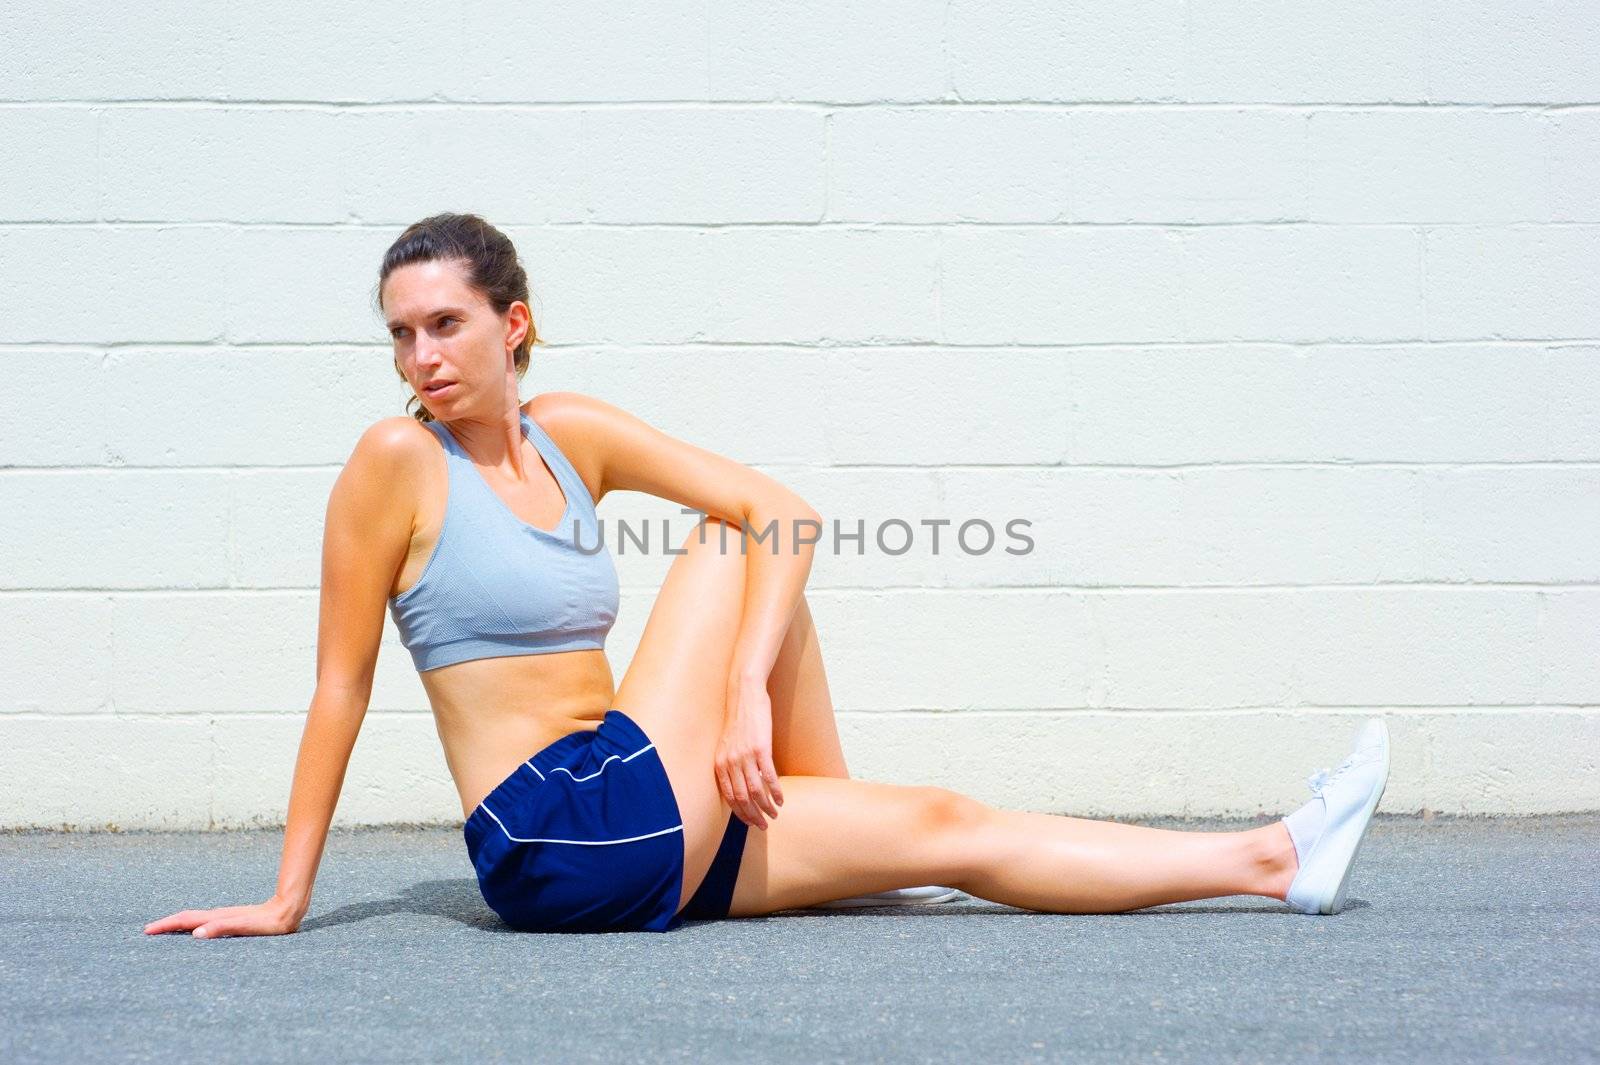 Mature woman working out in an urban setting, from a complete set of photos.